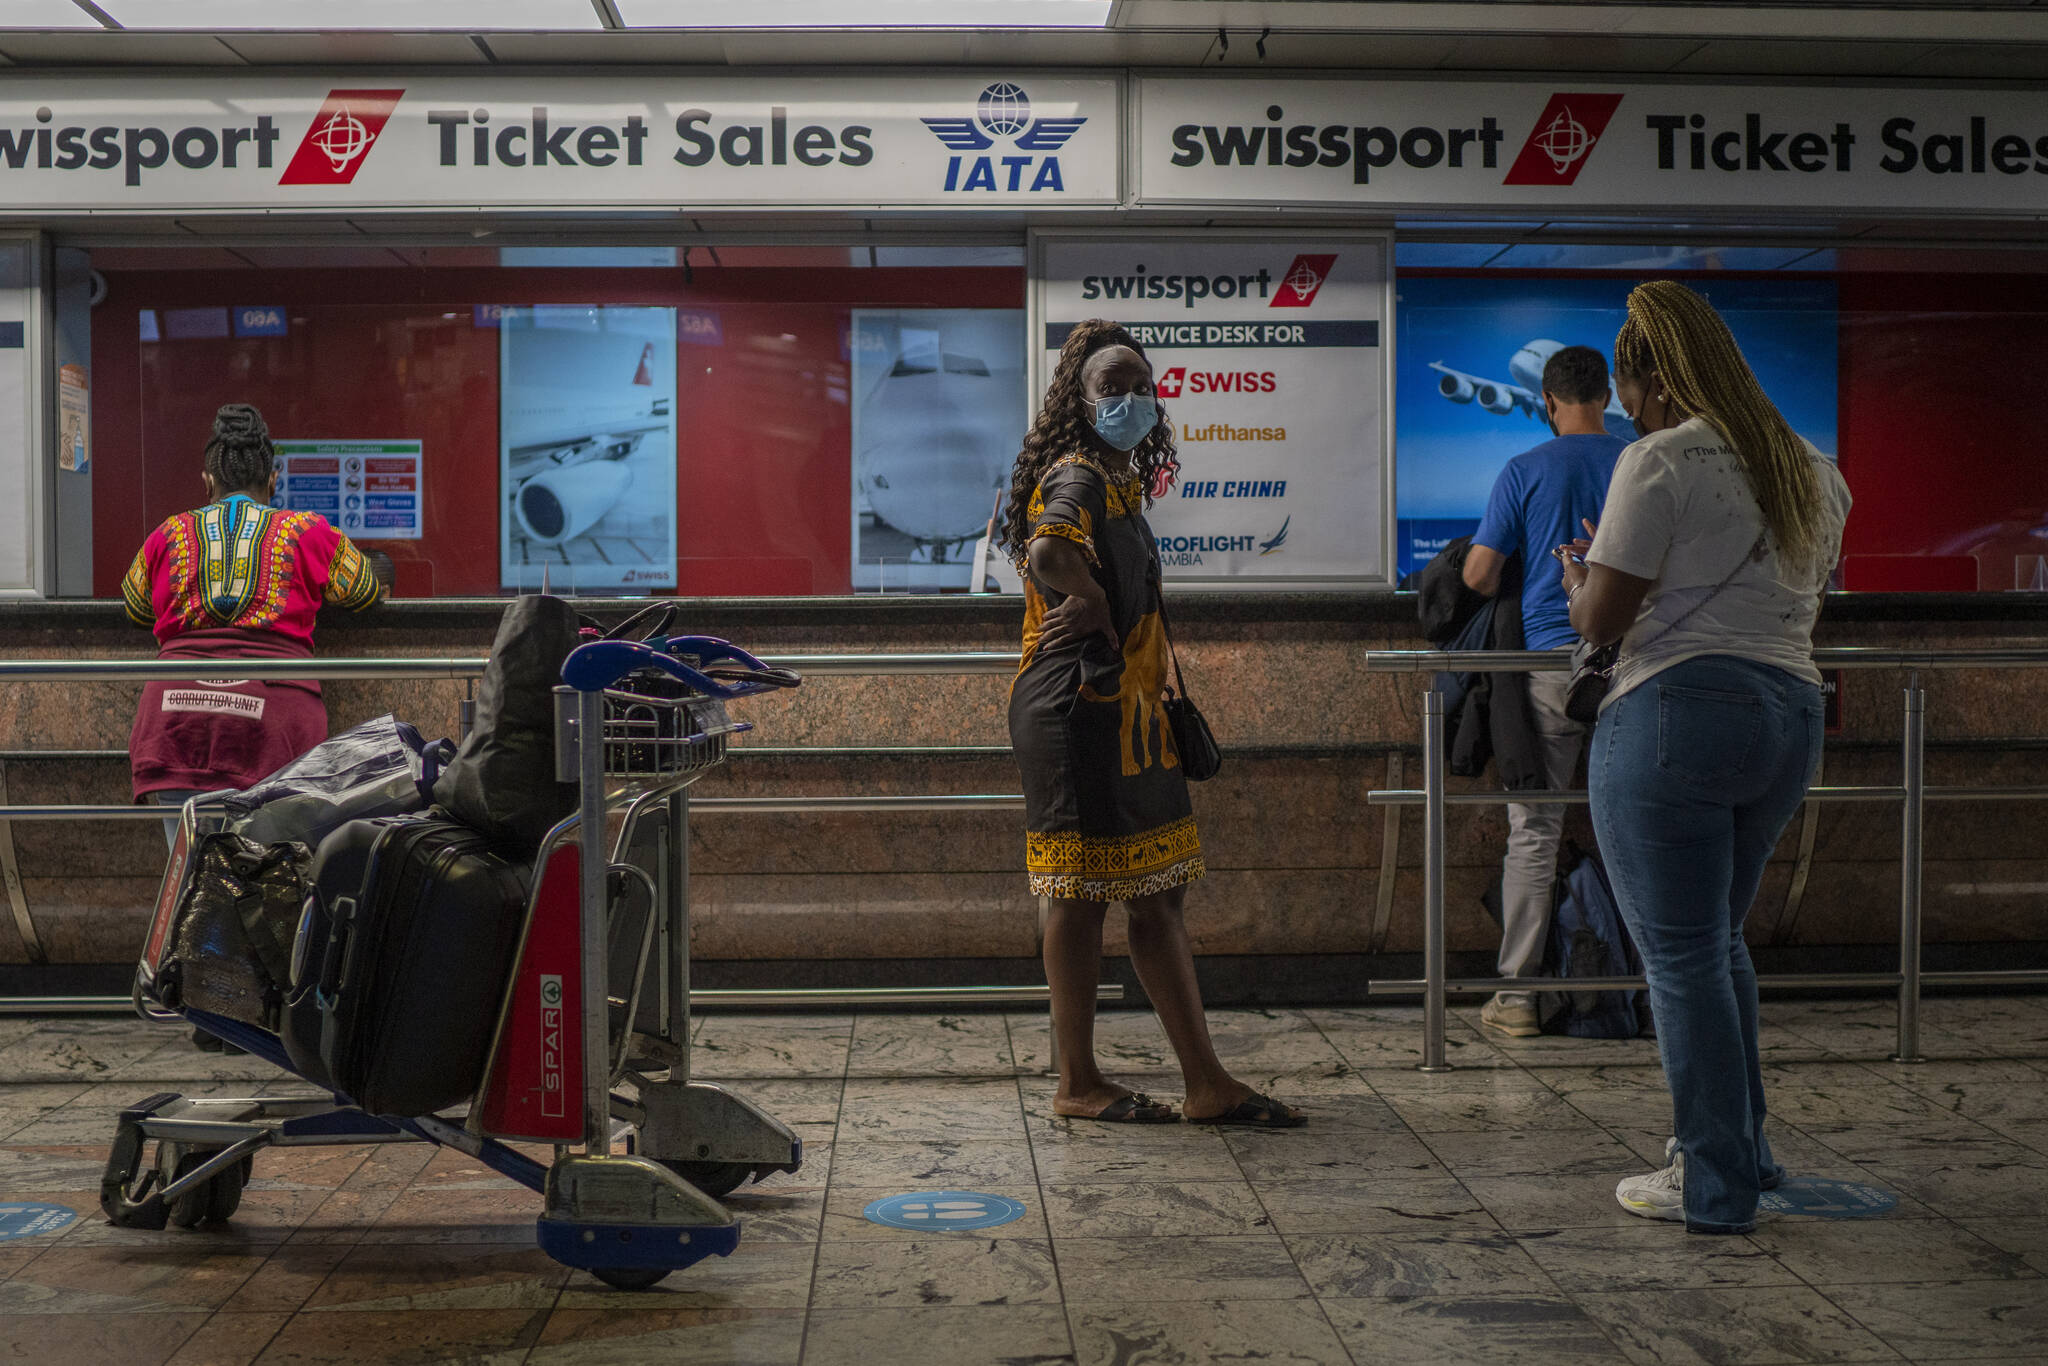 Passengers wait at a ticket counter at Johannesburg’s OR Tambo’s airport, Monday Nov. 29, 2021. The World Health Organisation urged countries around the world not to impose flight bans on southern African nations due to concern over the new omicron variant. (AP Photo/Jerome Delay)